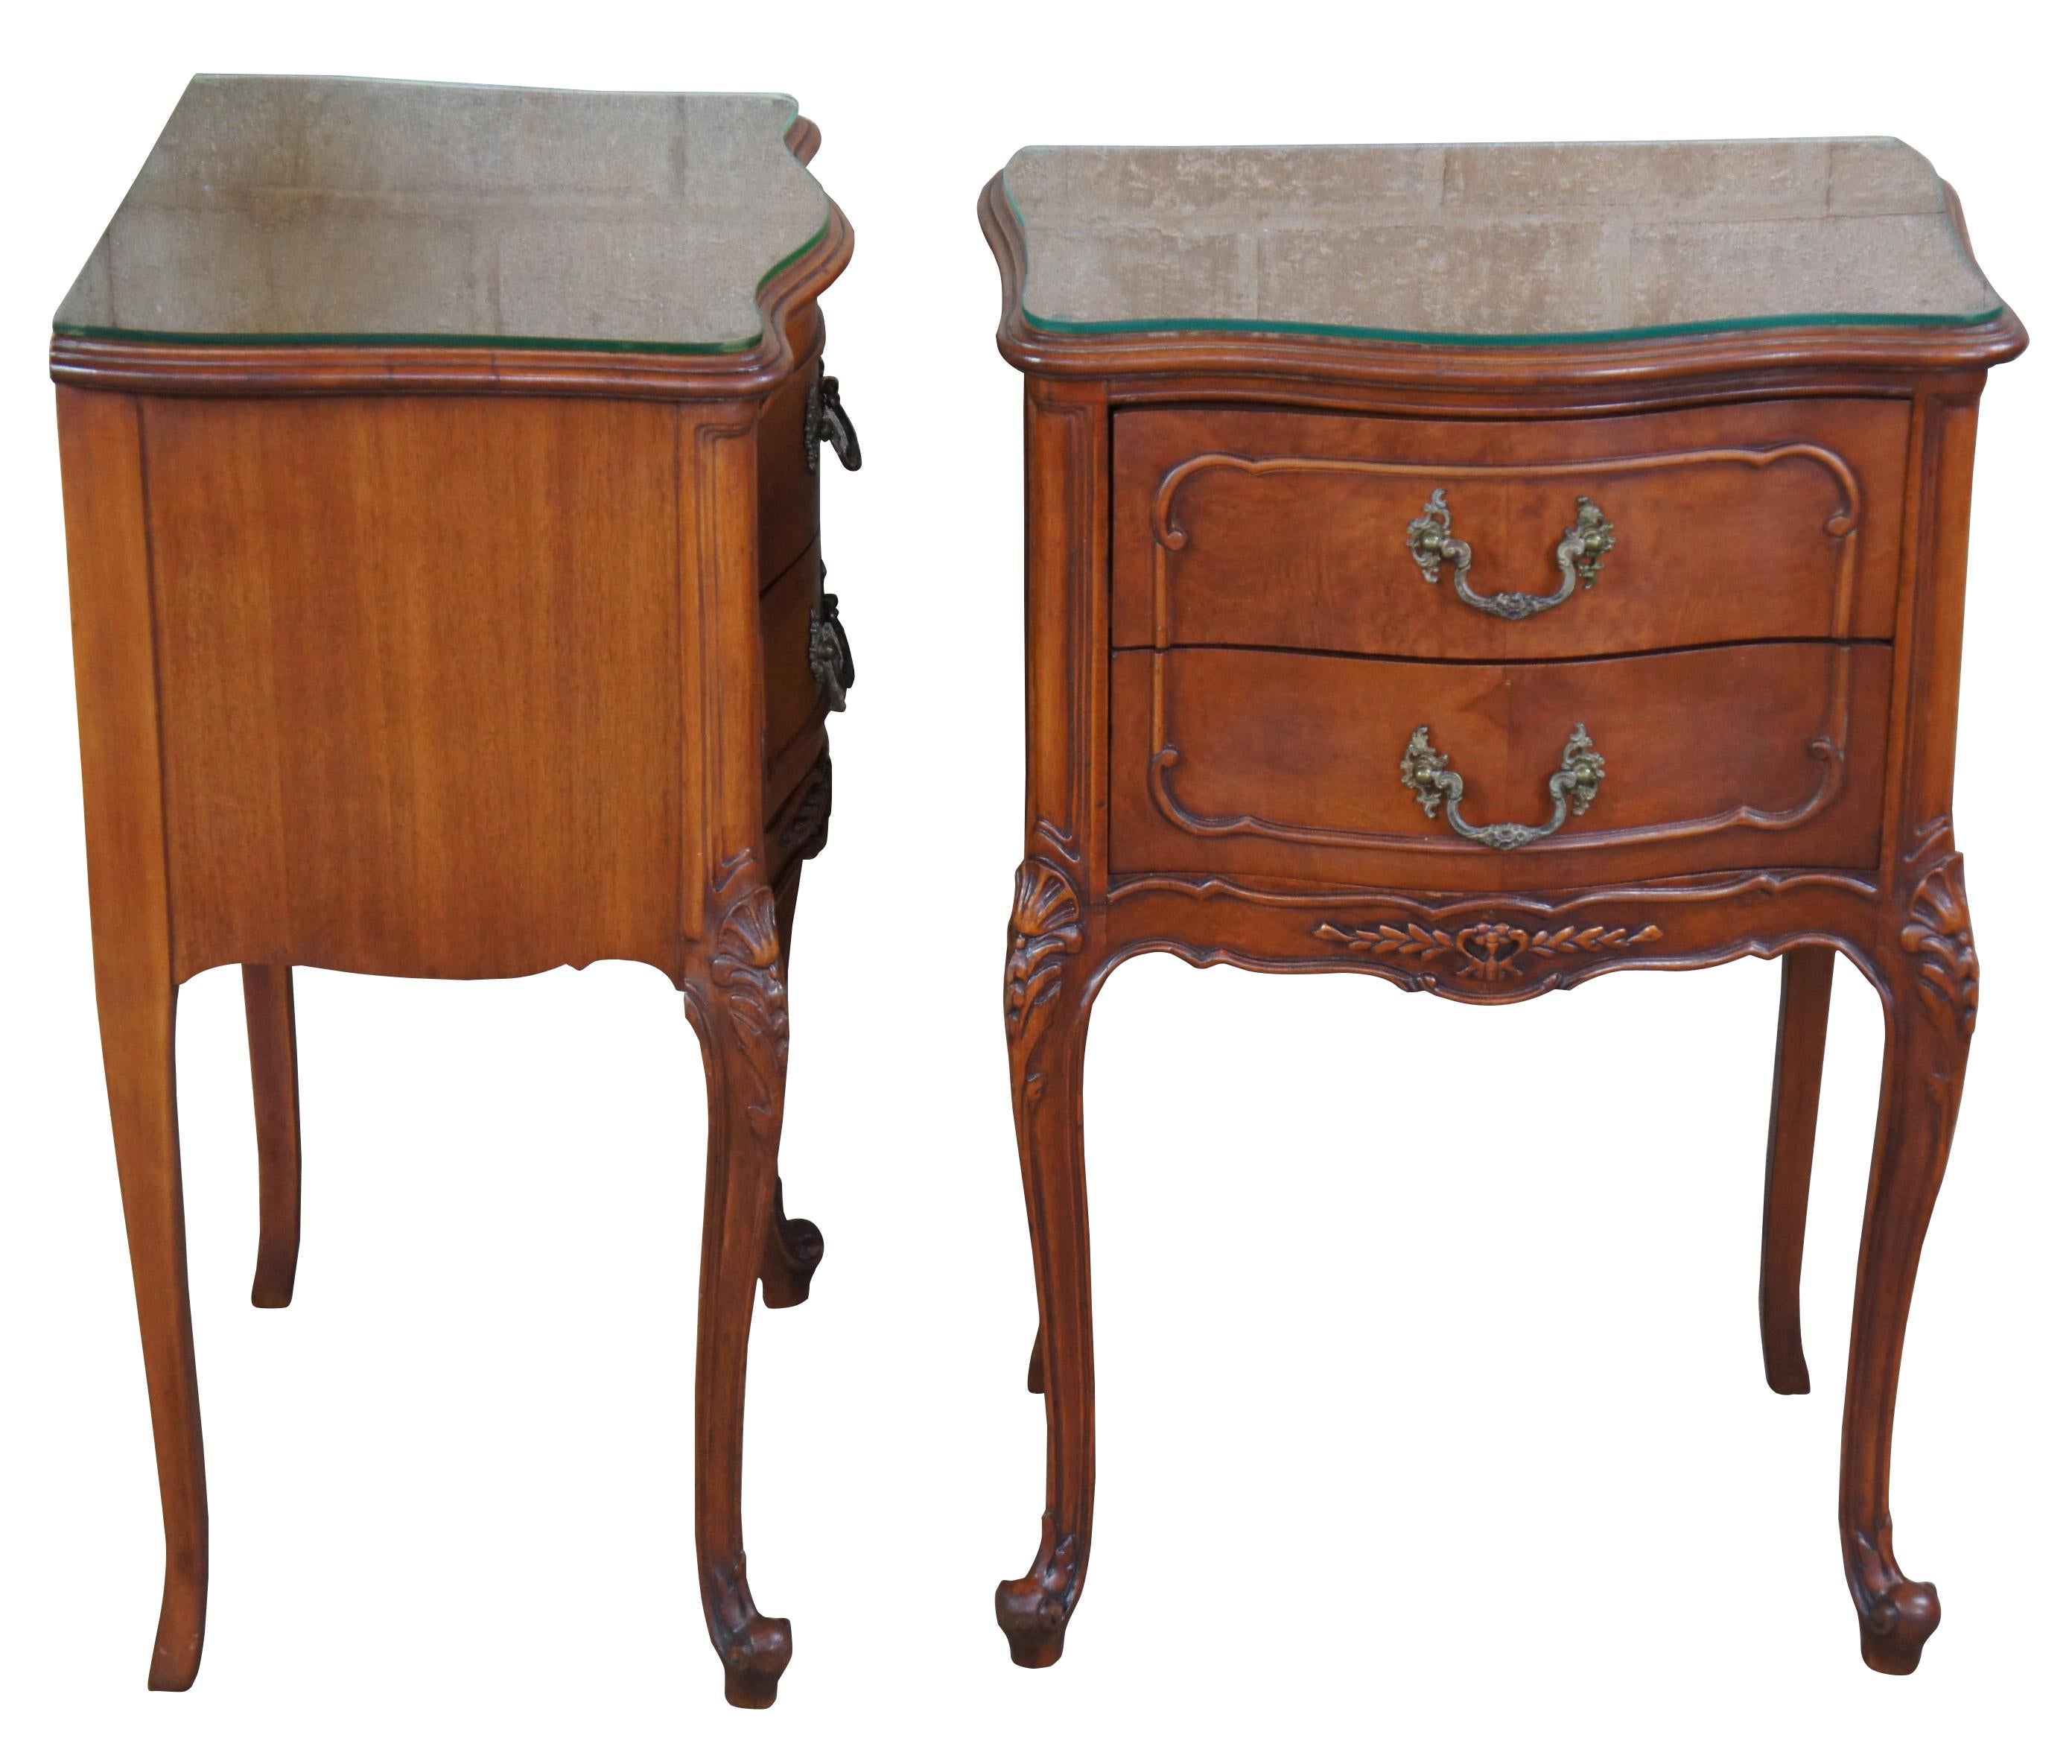 Antique walnut French Provincial Louis XV serpentine nightstands side end tables

